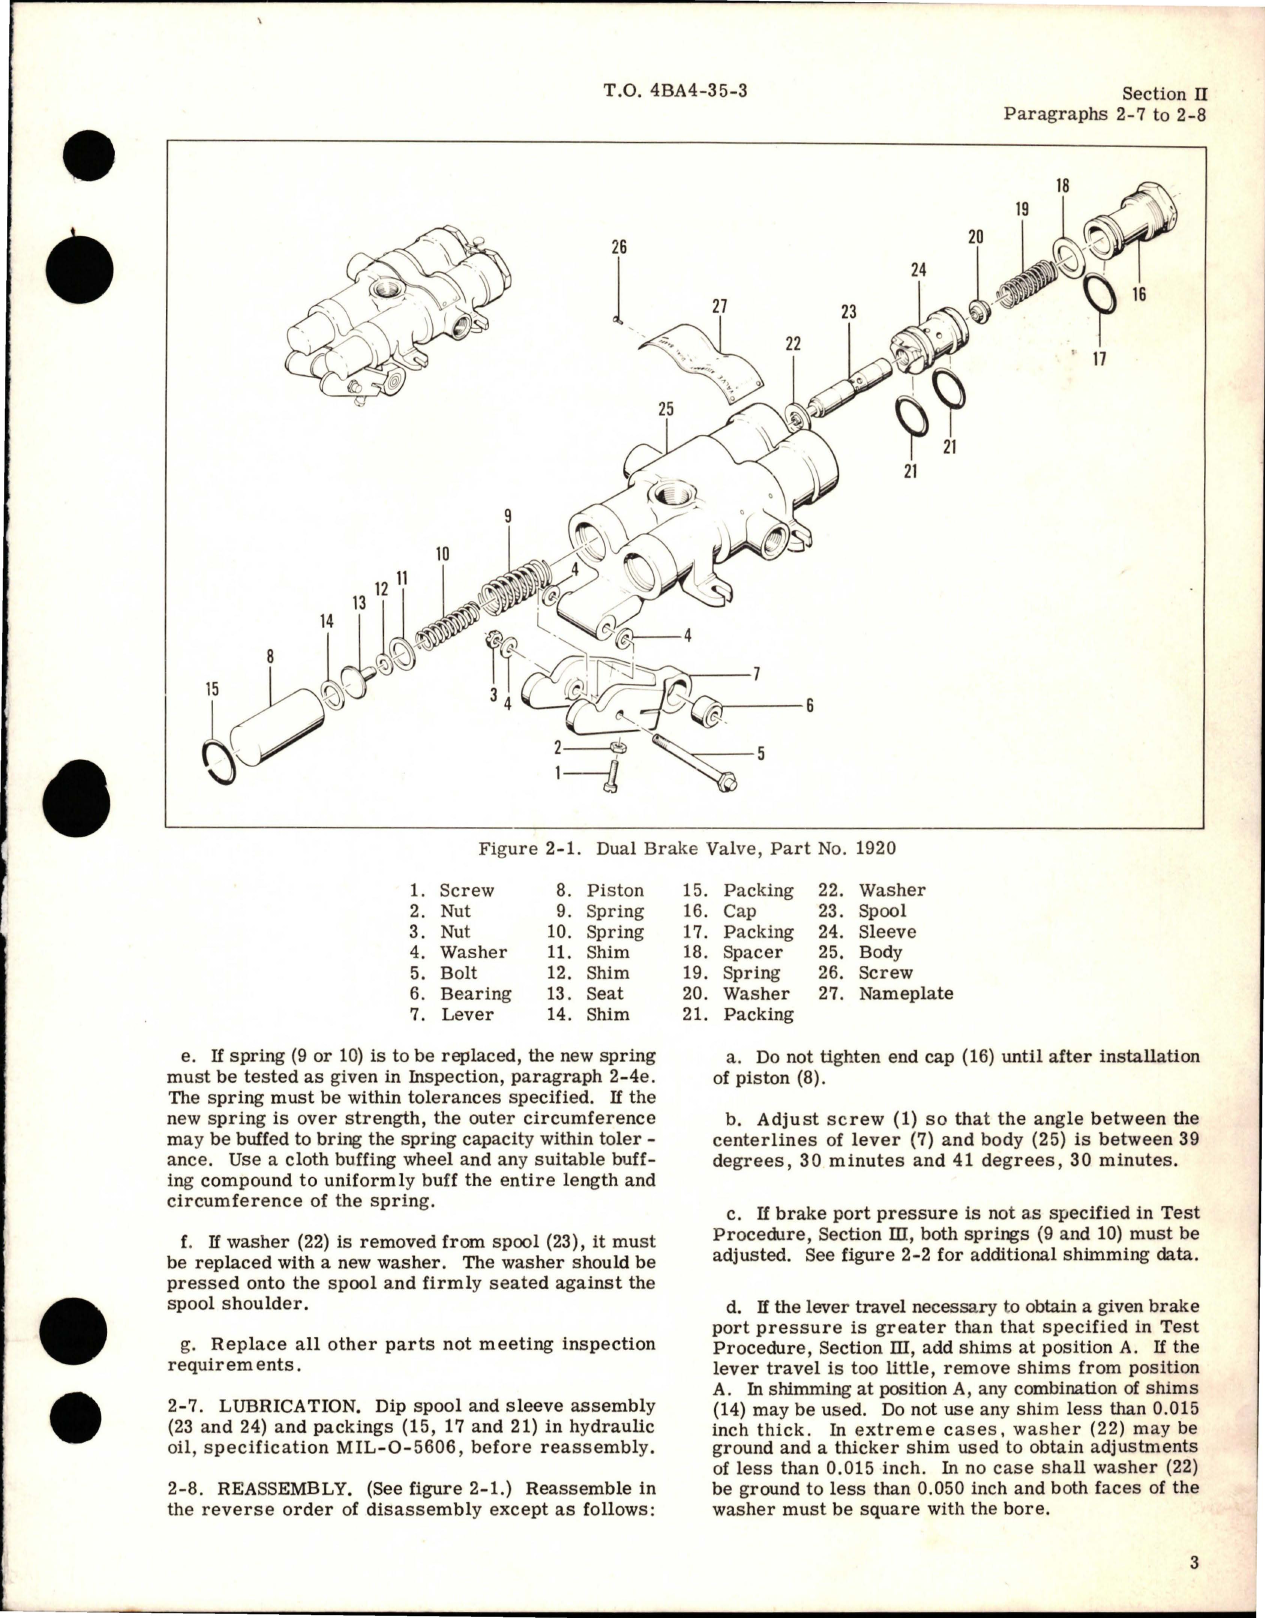 Sample page 7 from AirCorps Library document: Overhaul Instructions for Dual Brake Valves - Parts 1920, 1920-3, 5140, and 5142 